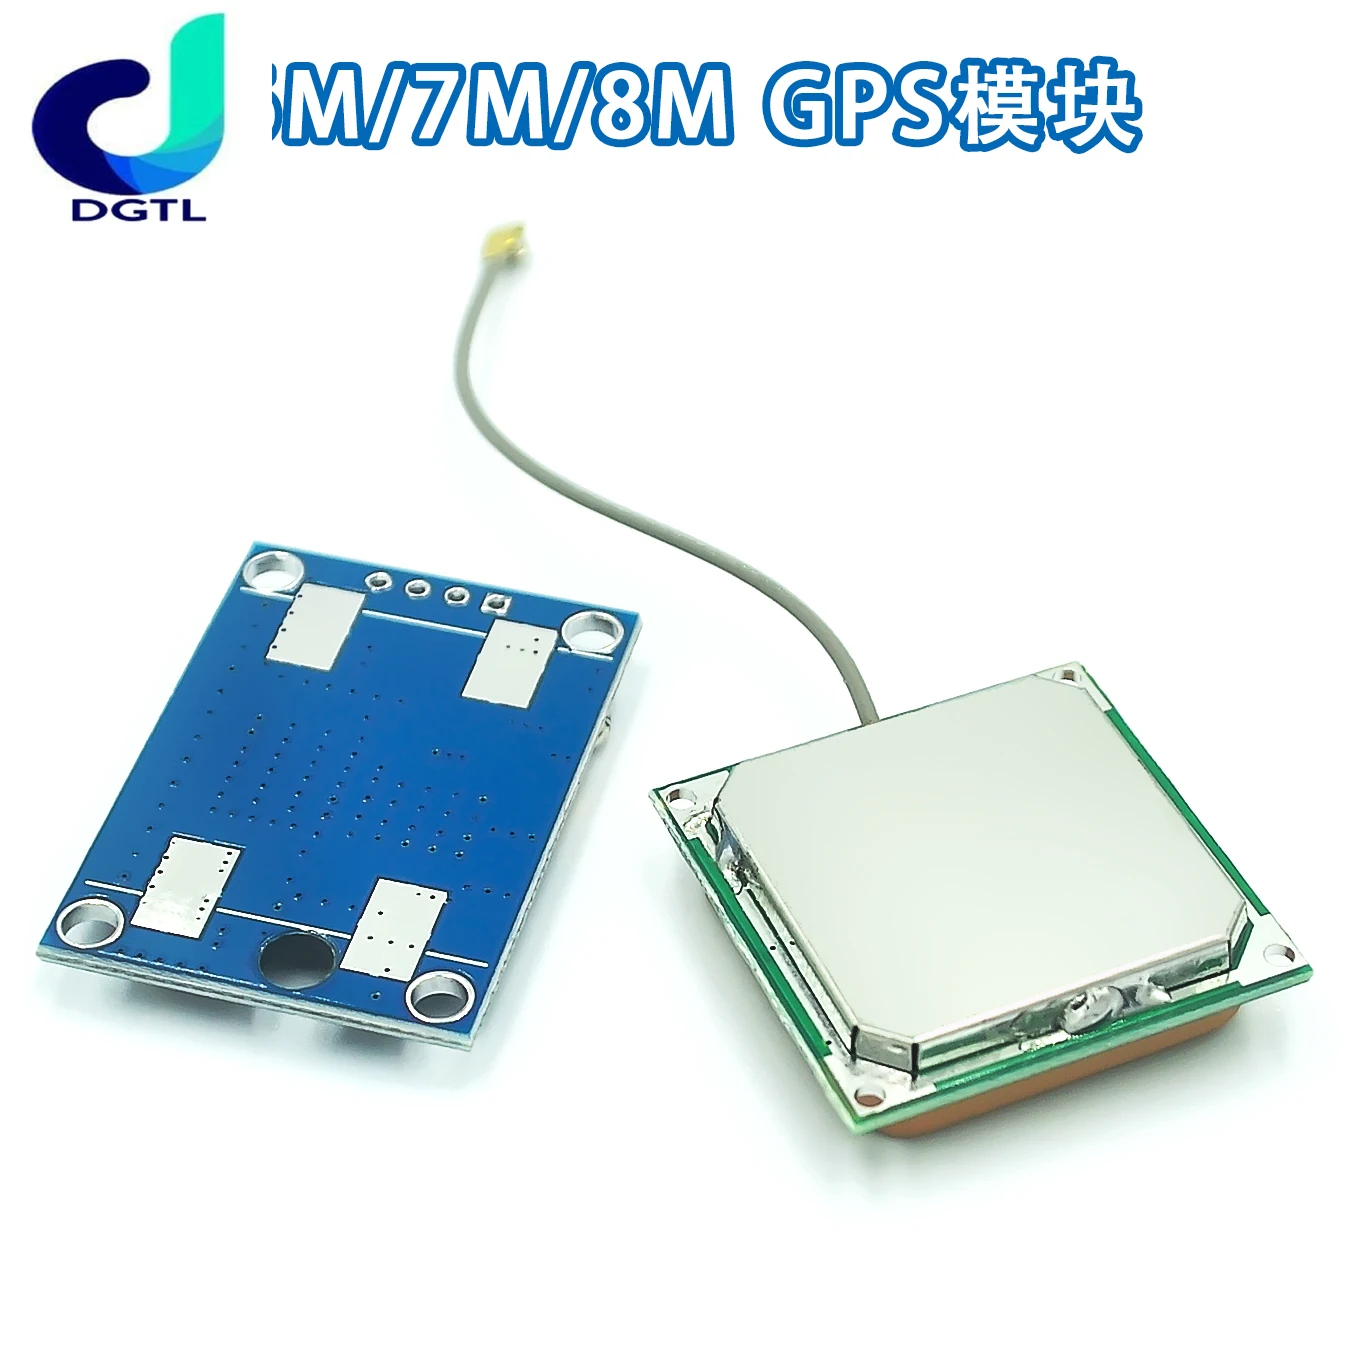 

GY-NEO6MV2 NEO-6M 7M 8M GPS Module NEO6MV2 with Flight Control EEPROM MWC APM2.5 large antenna for Arduino